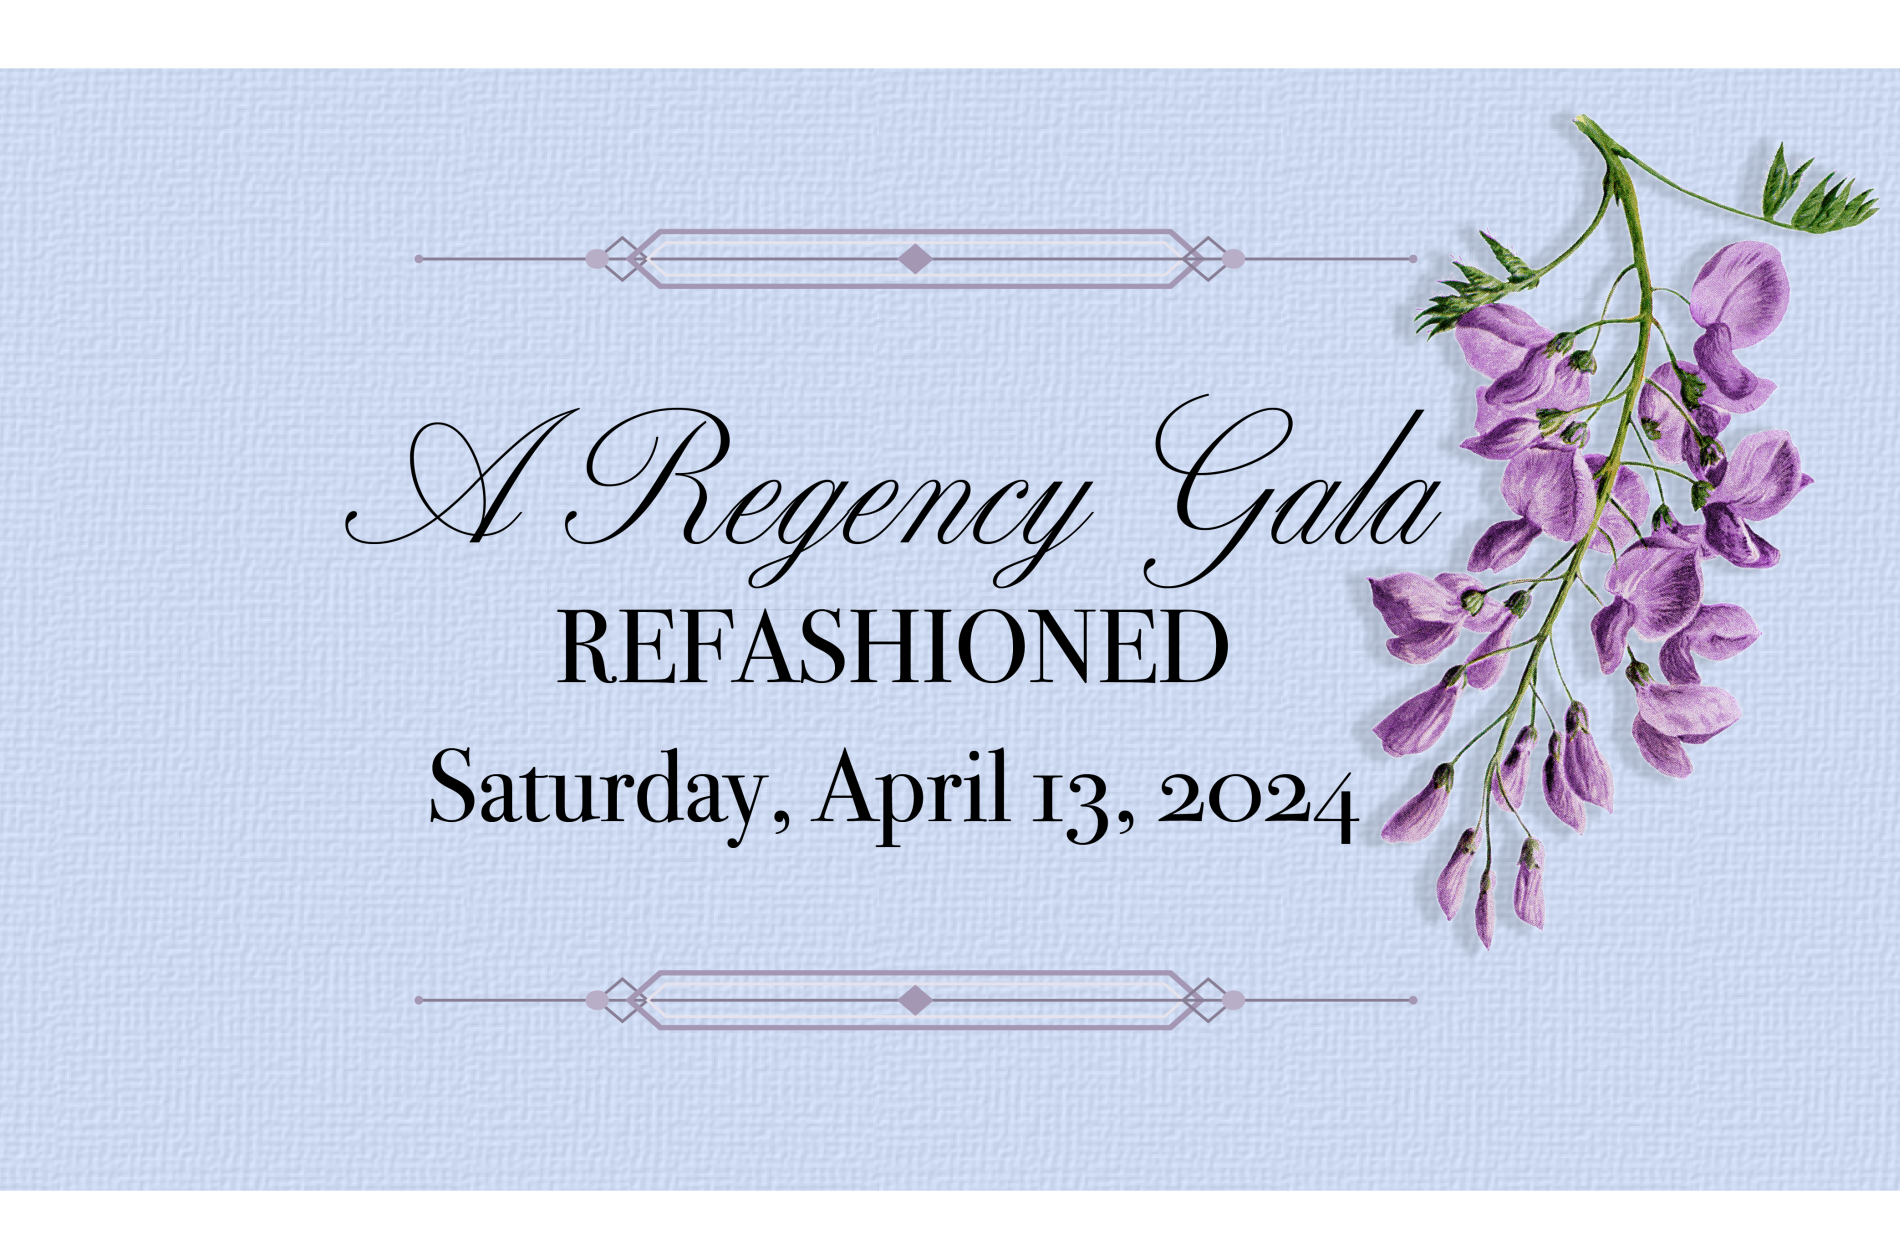 Text: Our Annual Gala; Save the Date!; Saturday, April 13, 2024